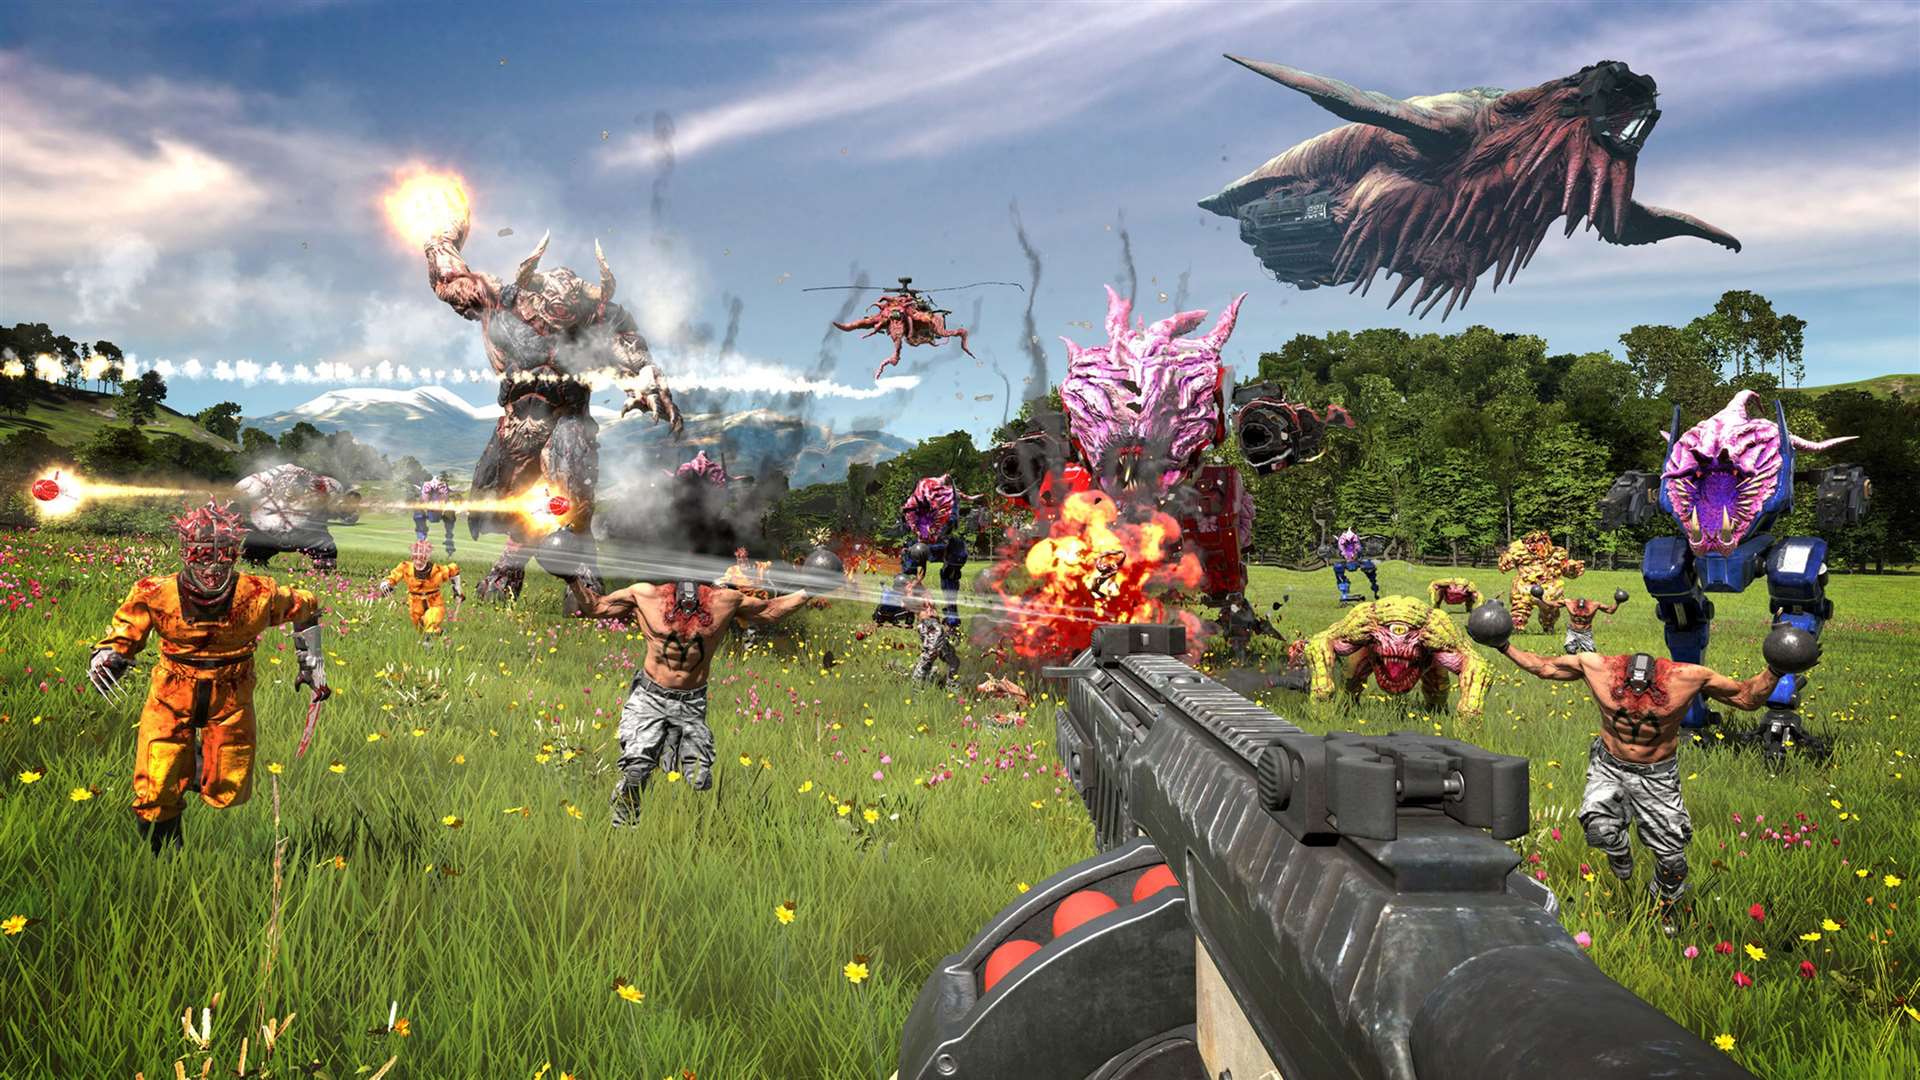 Serious Sam 4. Picture: PA Photo/Handout